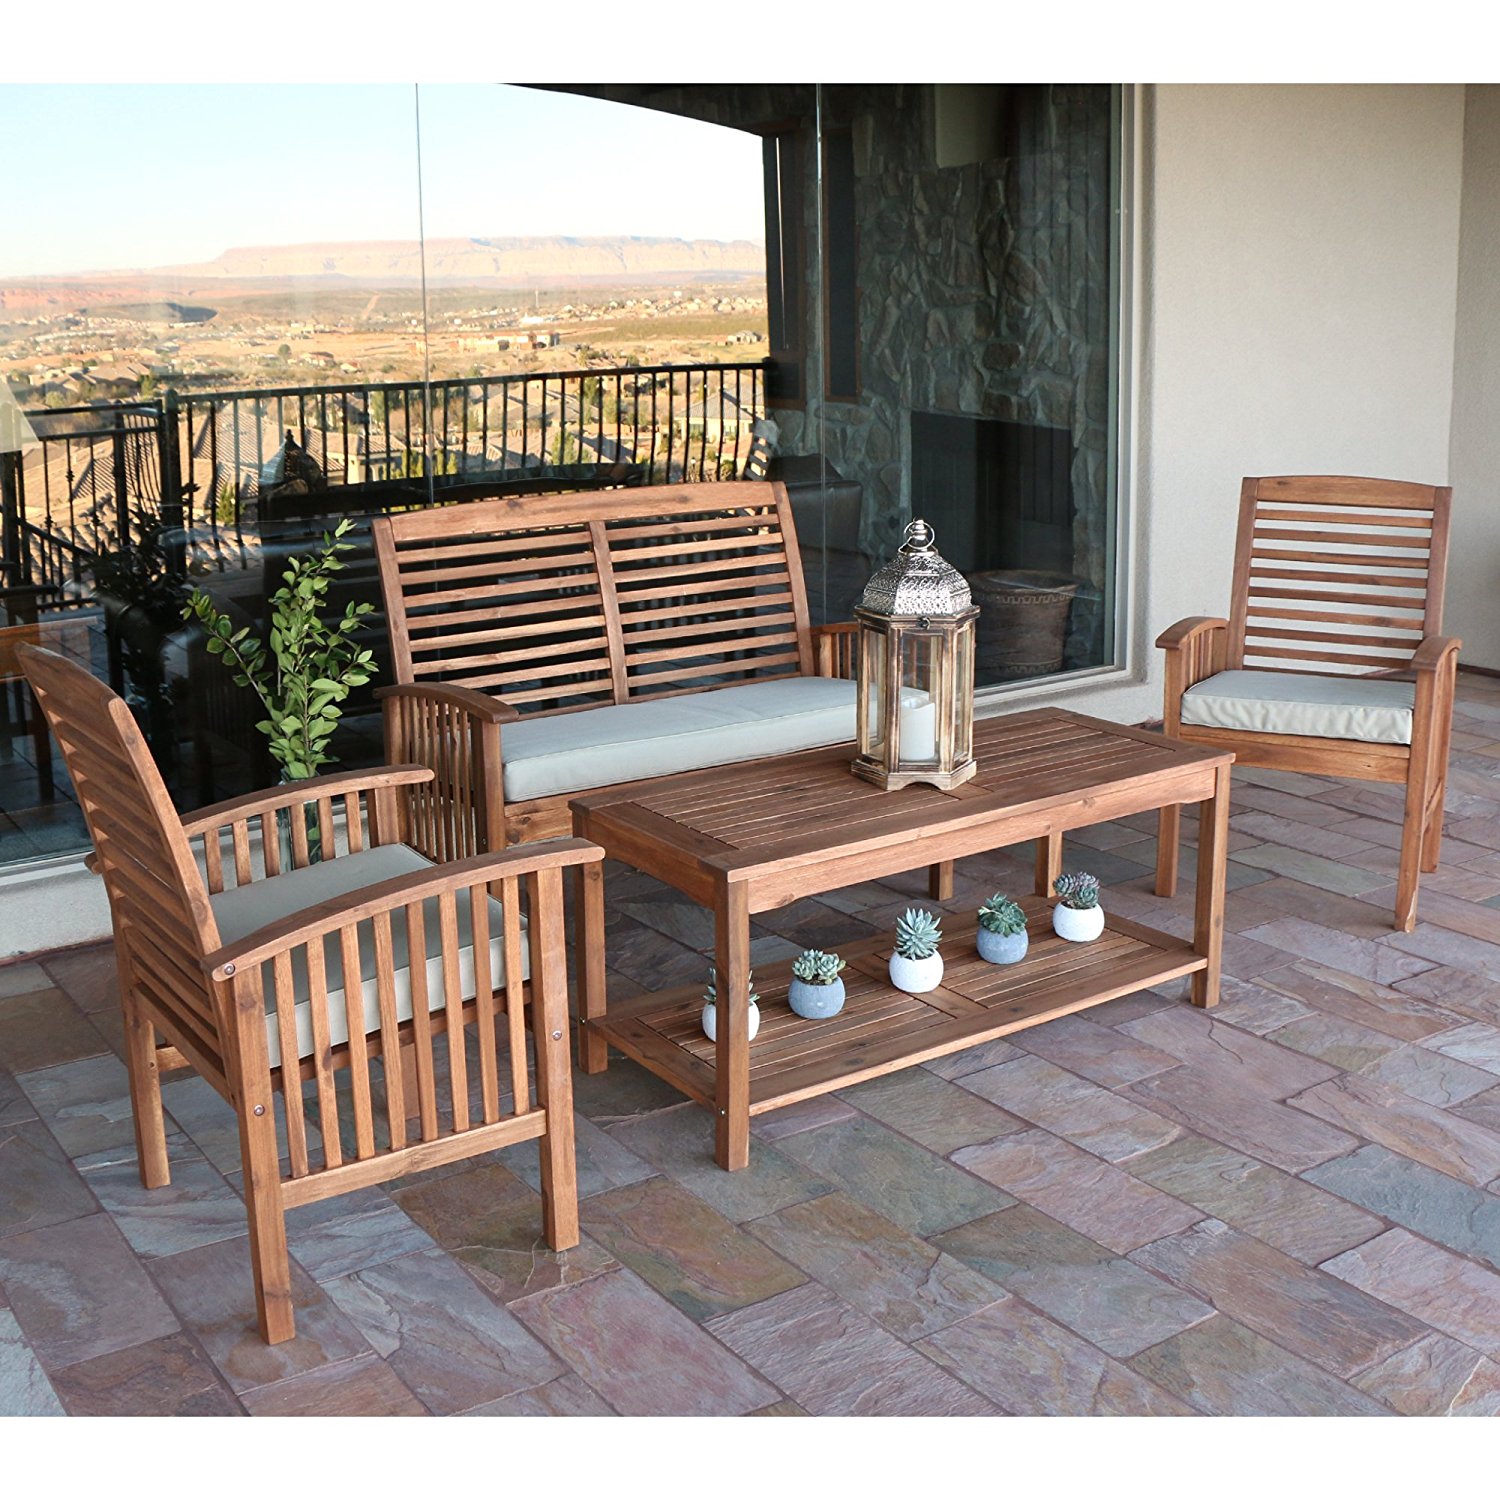 Patio Furniture Weights. 11 Tips To Secure Your Outdoor Furniture